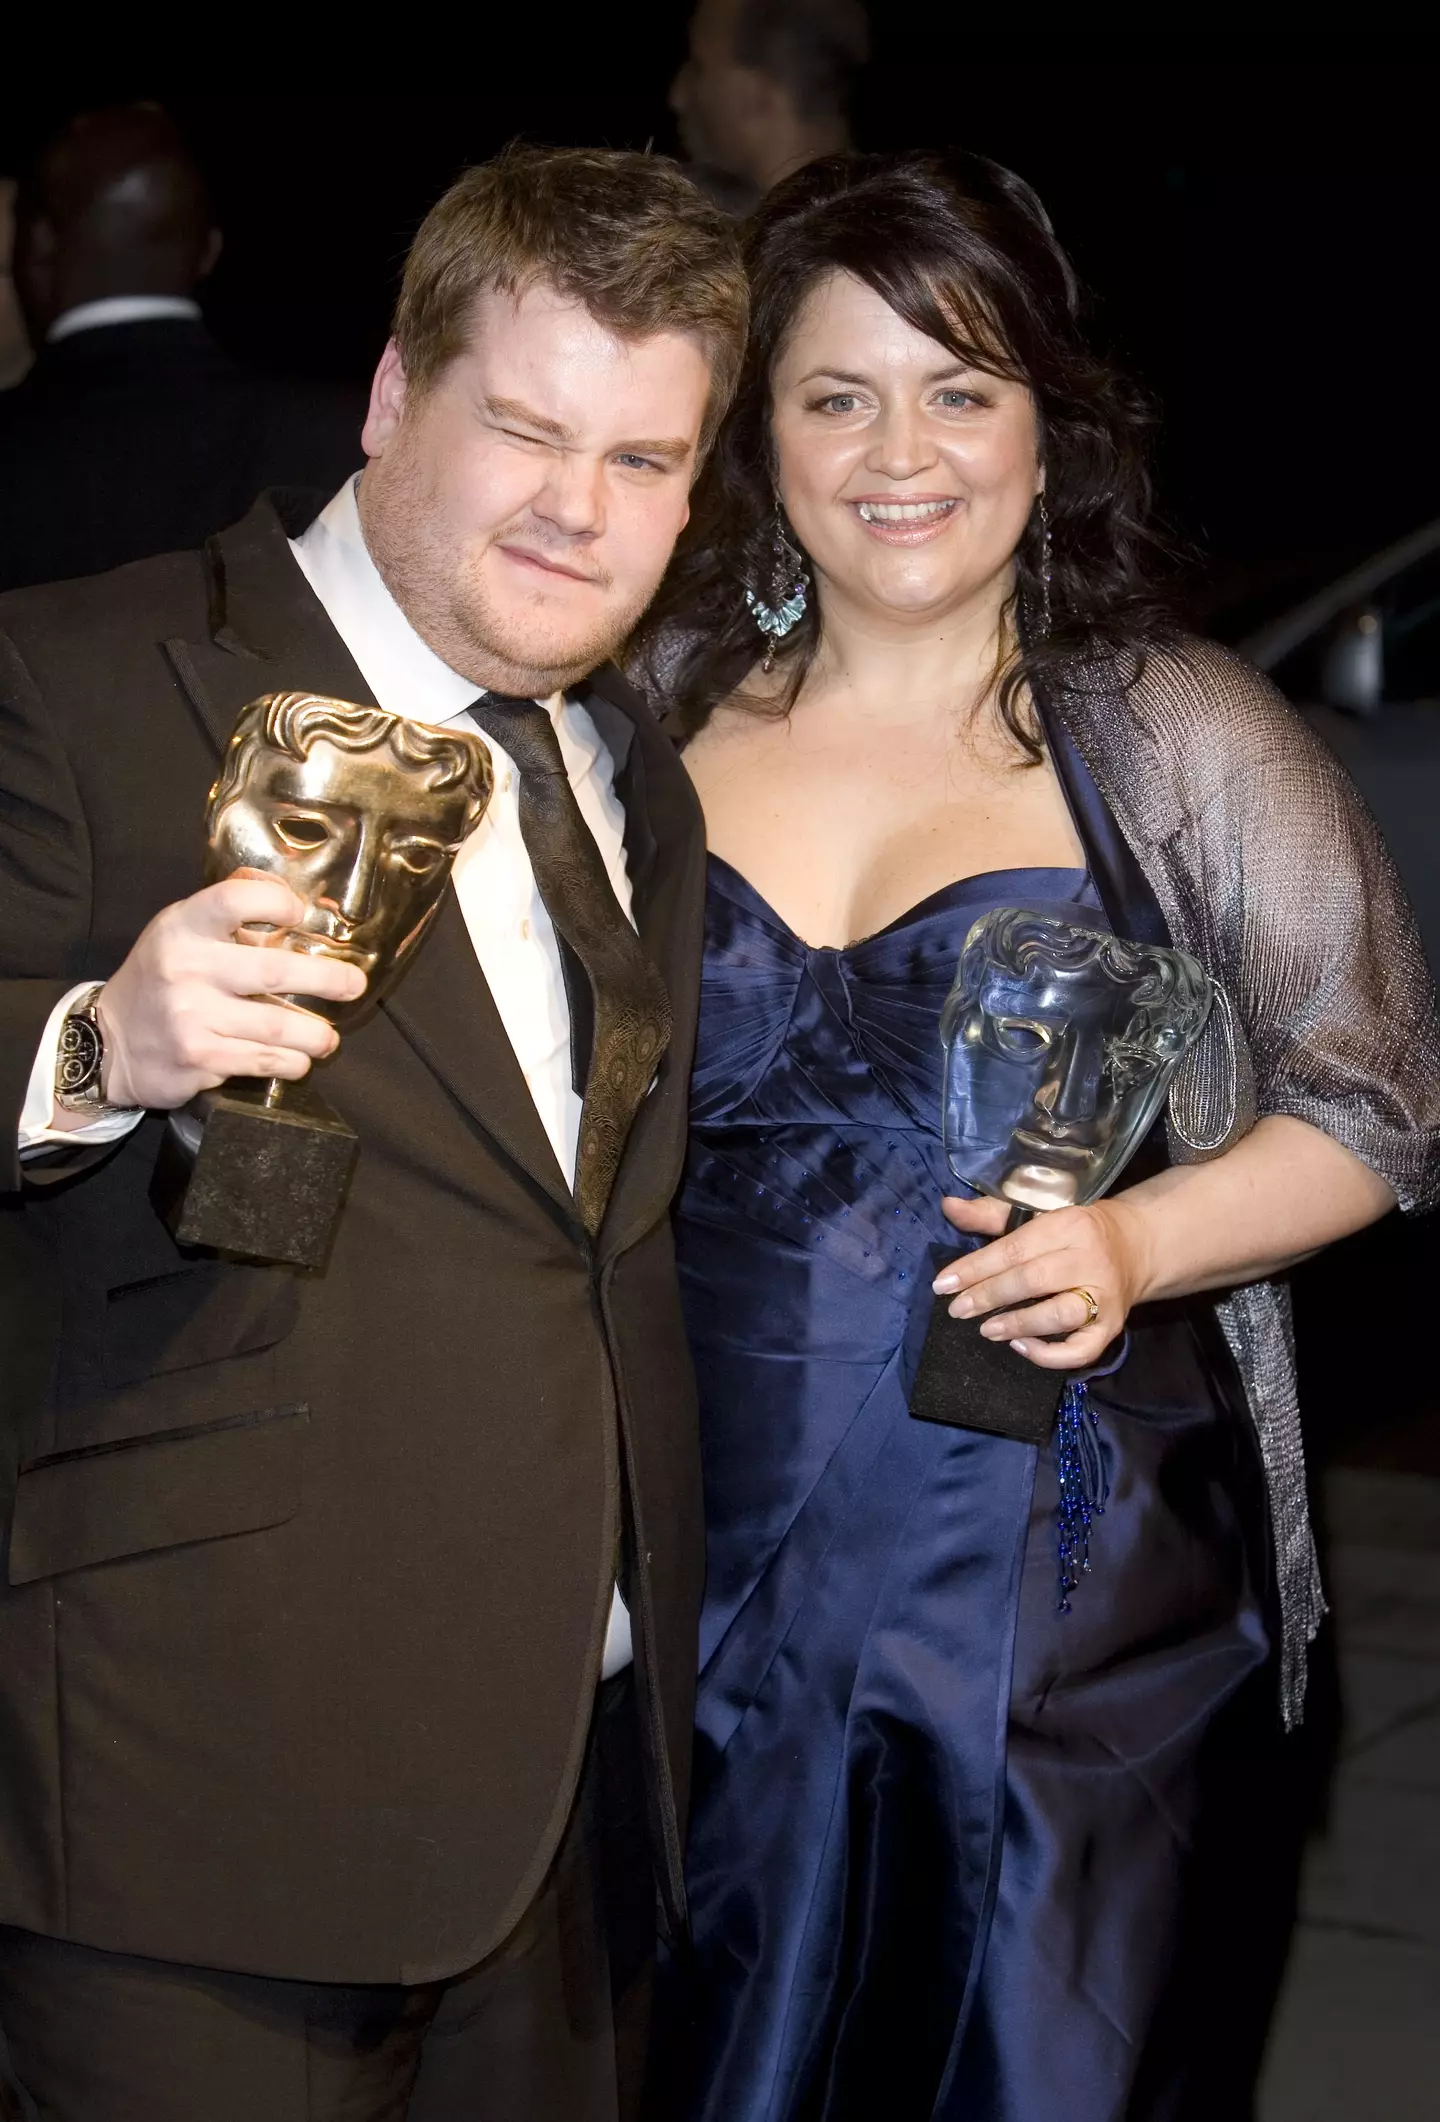 Corden and Jones wrote the hilarious sitcom together.